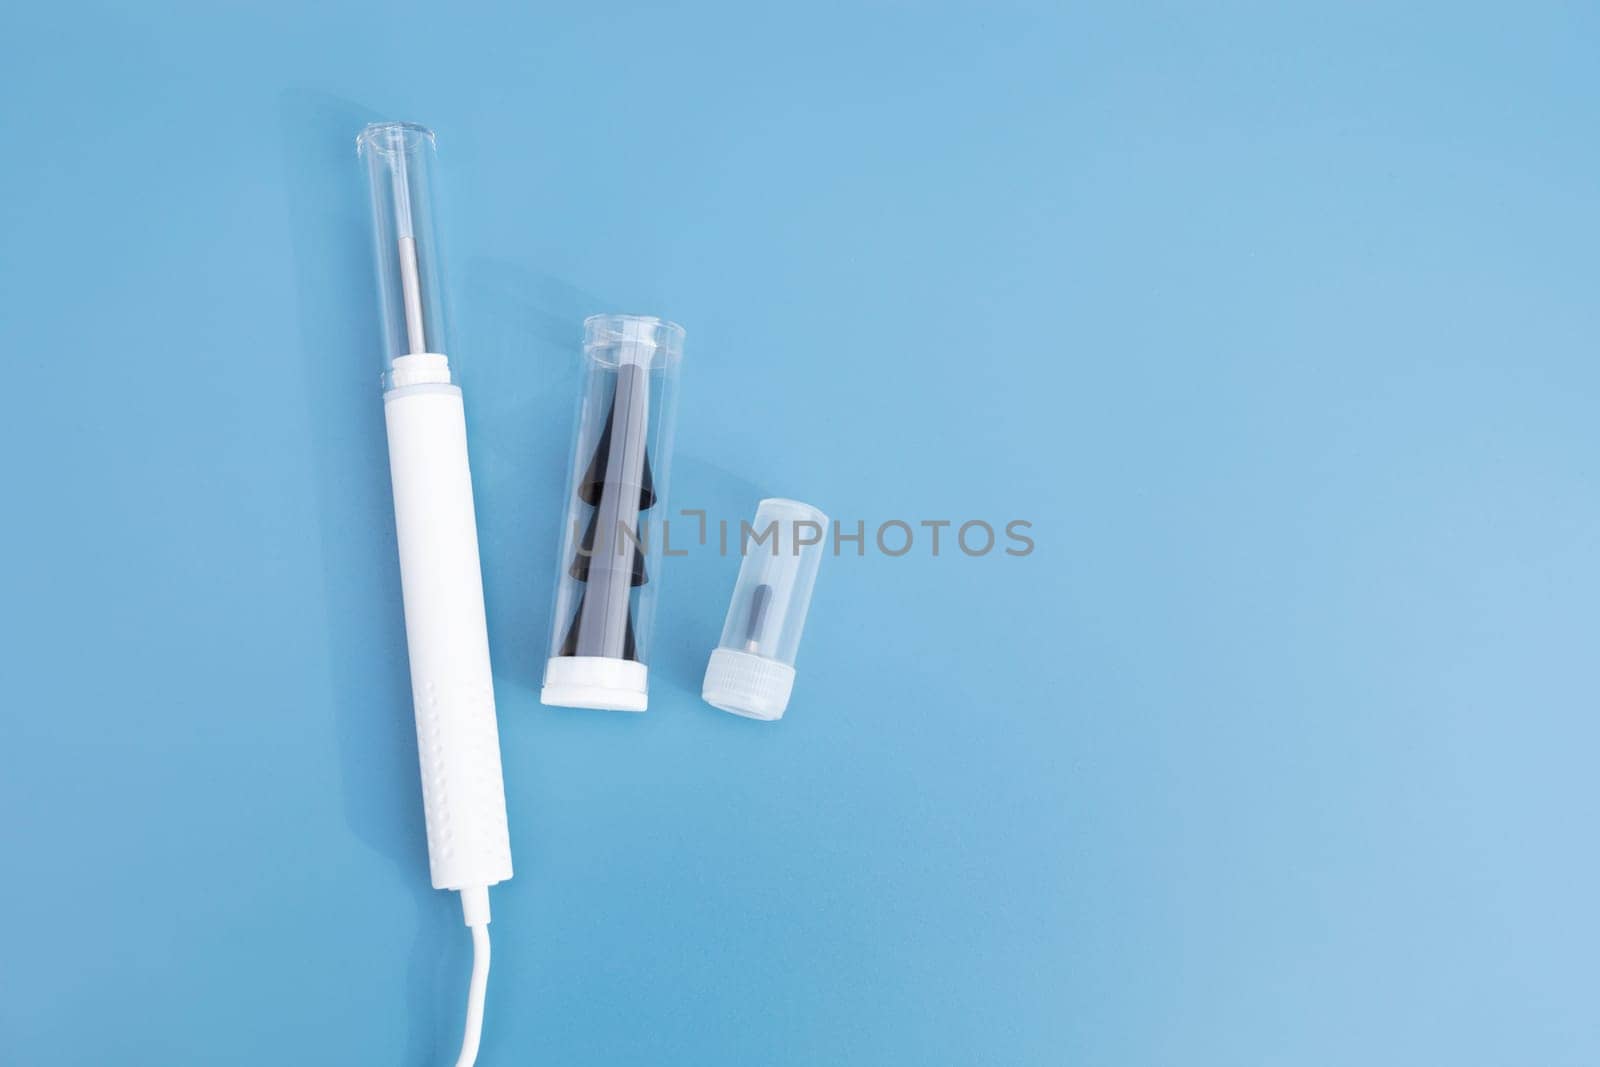 Top View Ear Scope For Wax Removal Tool. Digital Otoscope, Earwax Cleaner With Gyroscope, Camera, Light. Cleaning Ears Device Connected to Smartphone. Ear Cleaning Technology. Copy Space, Mockup.